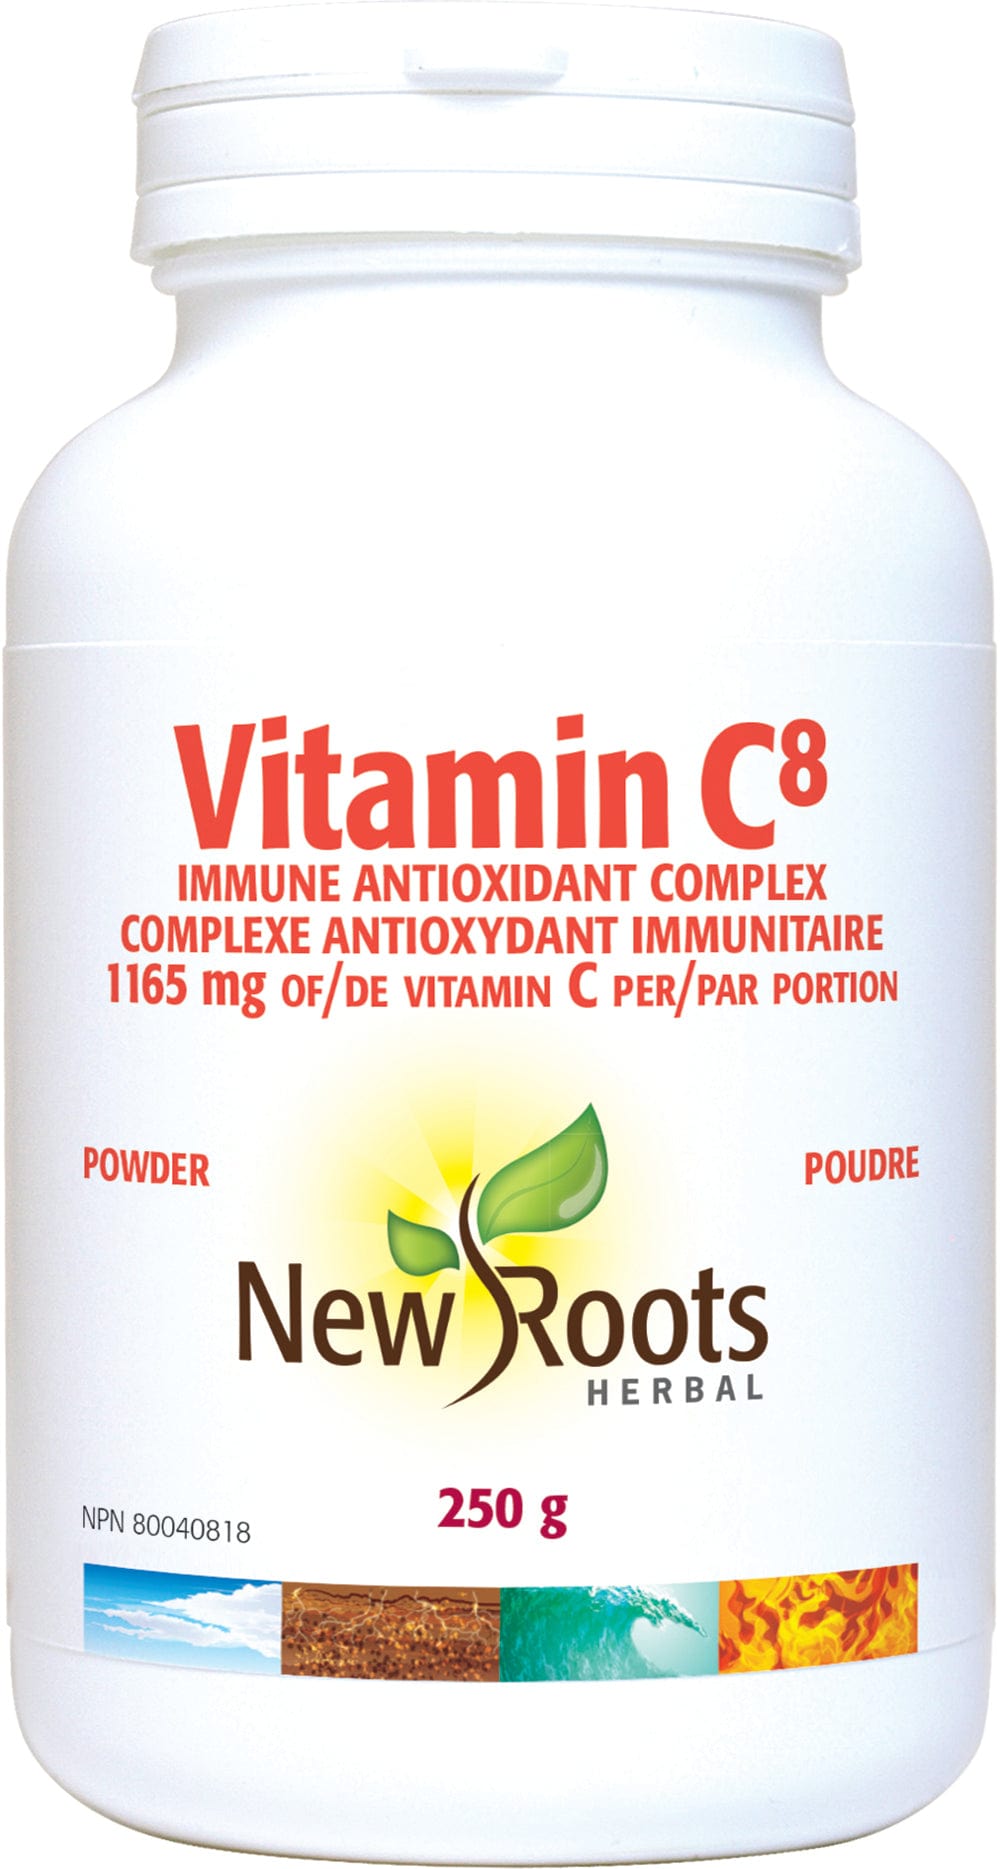 NEW ROOTS HERBAL Suppléments Vitamine C8 1165mg 250g